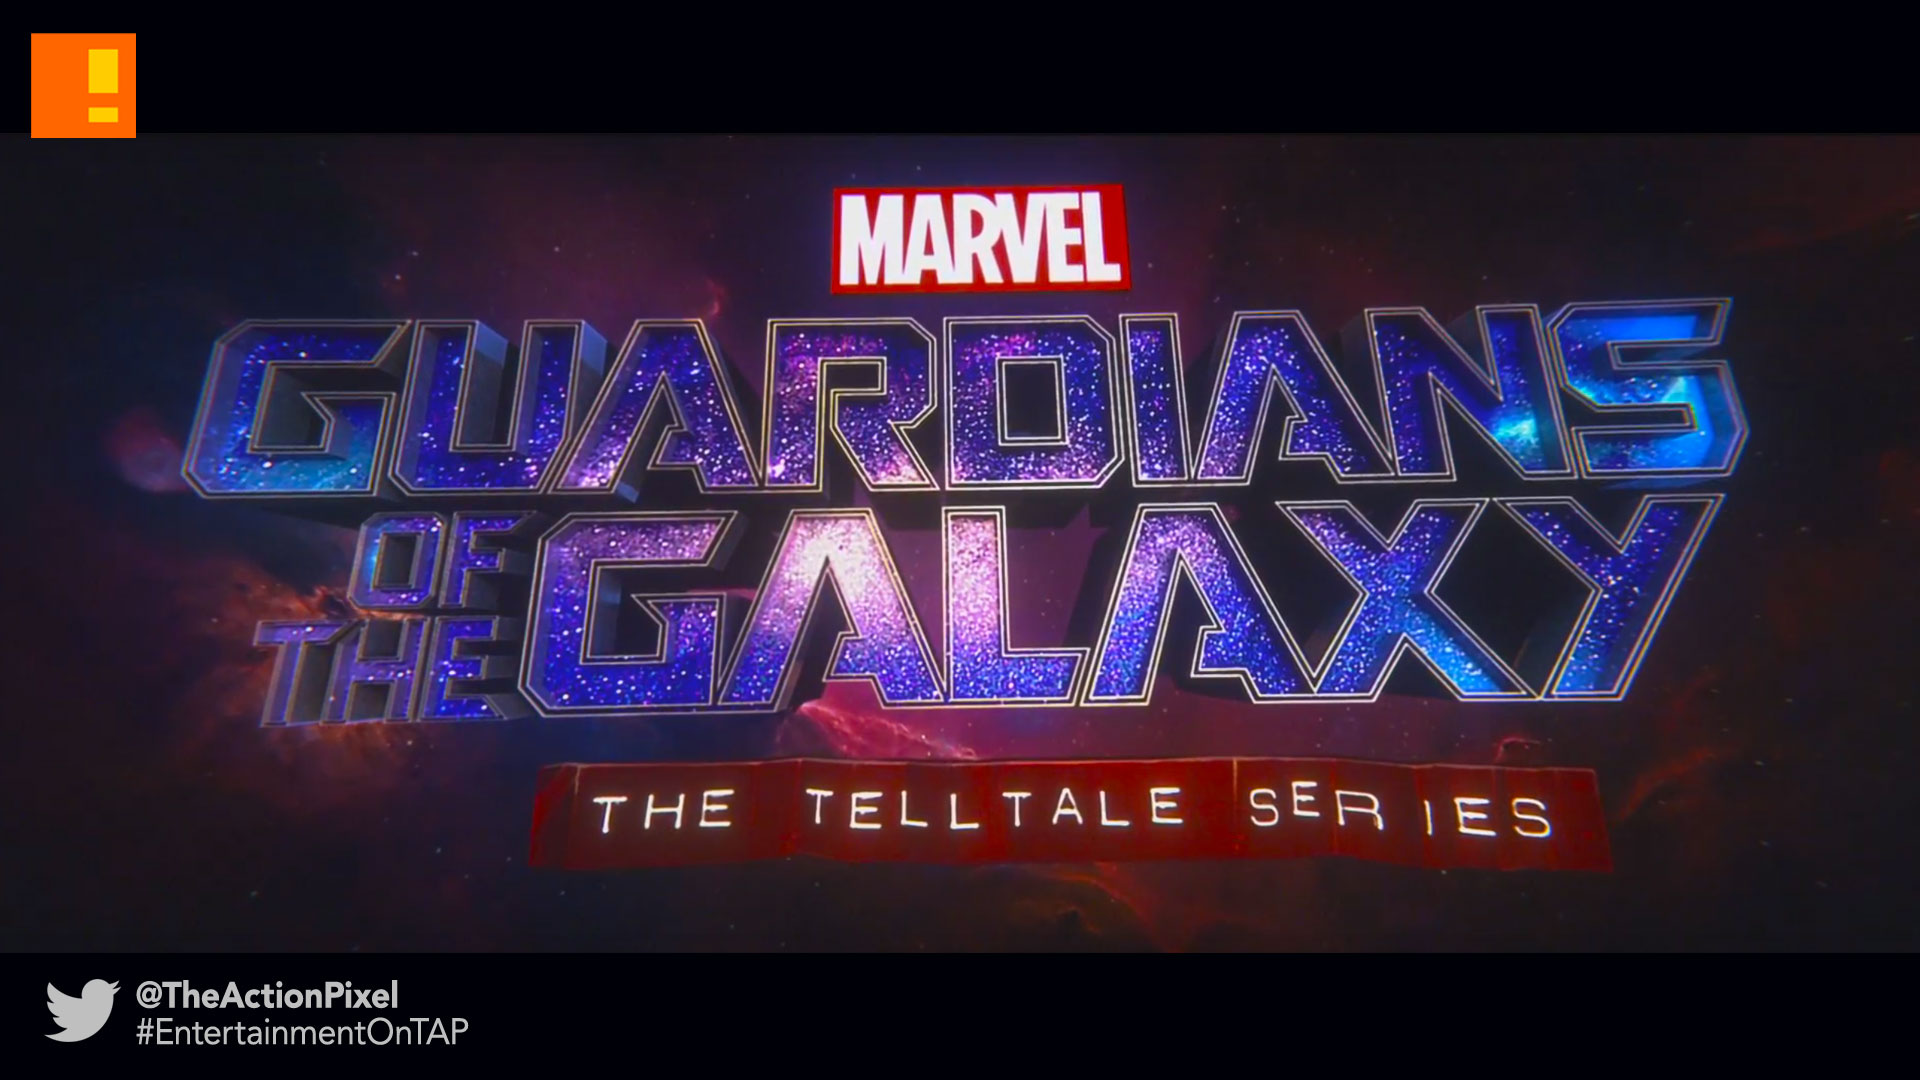 gotg, telltale games, telltale series, marvel, guardians of the galaxy, entertainment on tap, the action pixel,